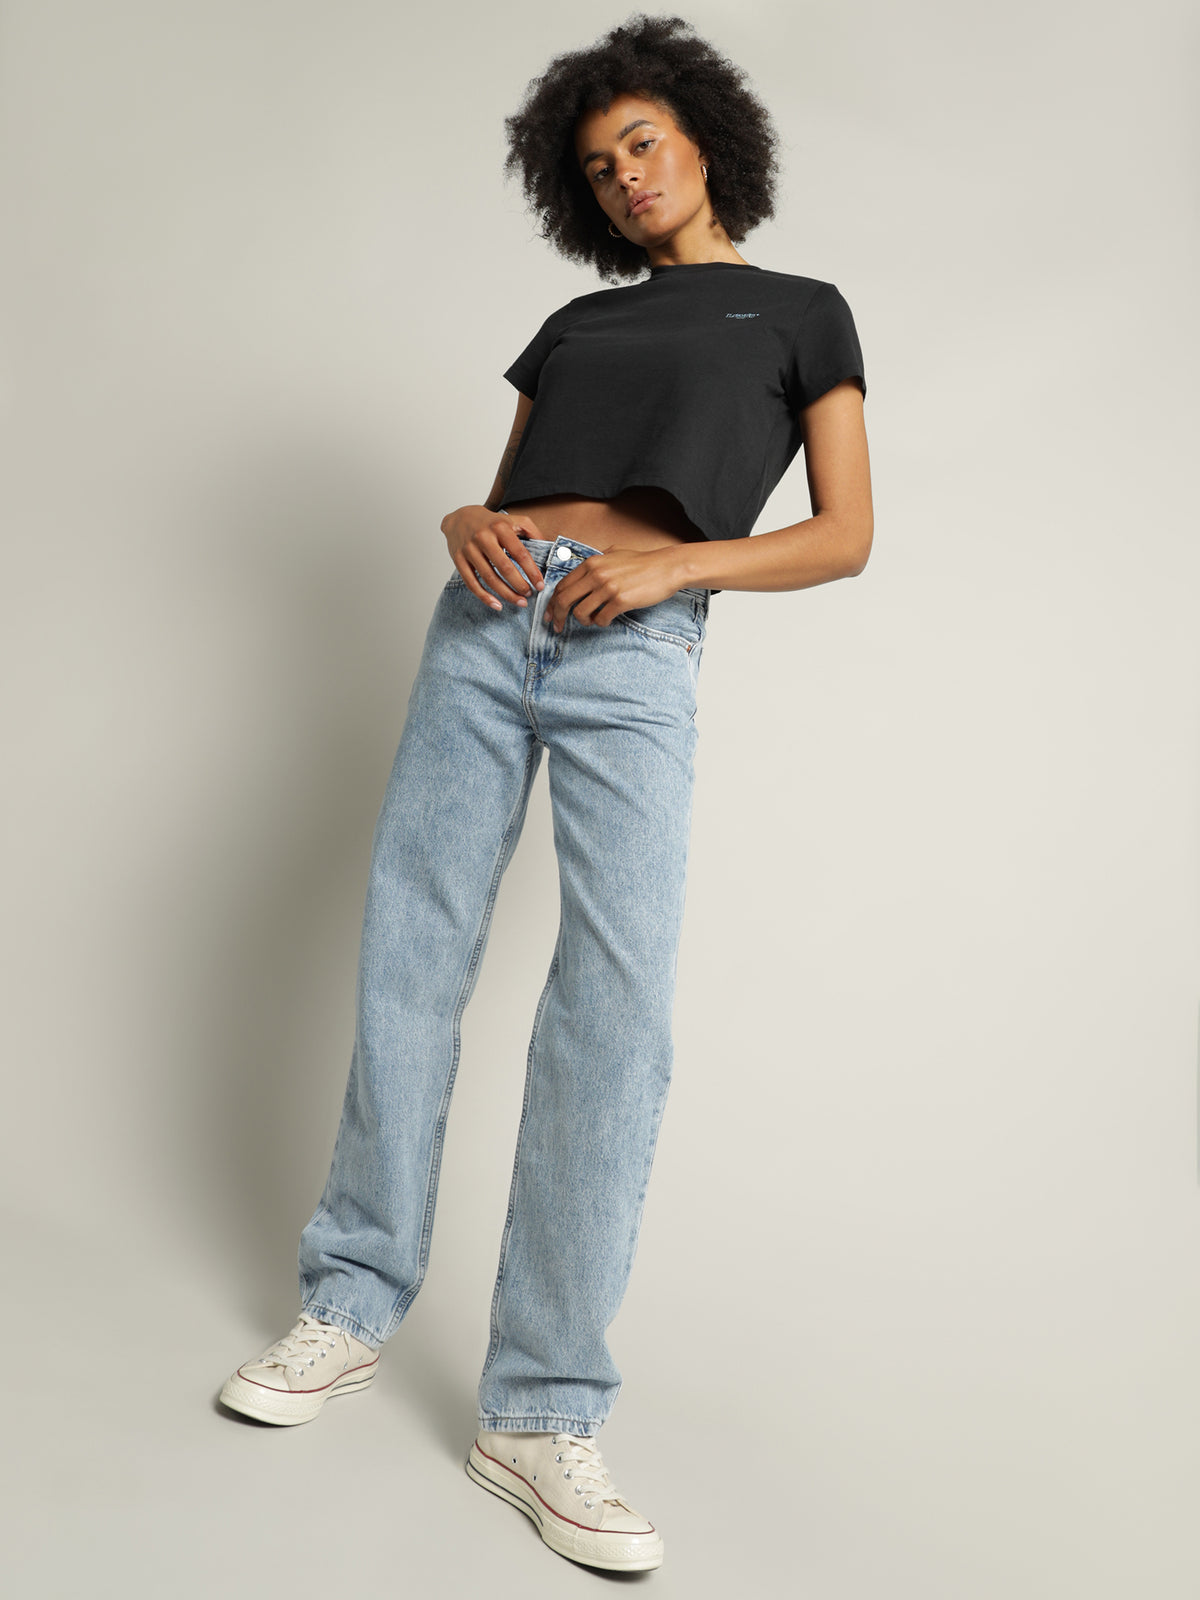 Low Pro Mid Rise Jeans in Charlie Glow Up